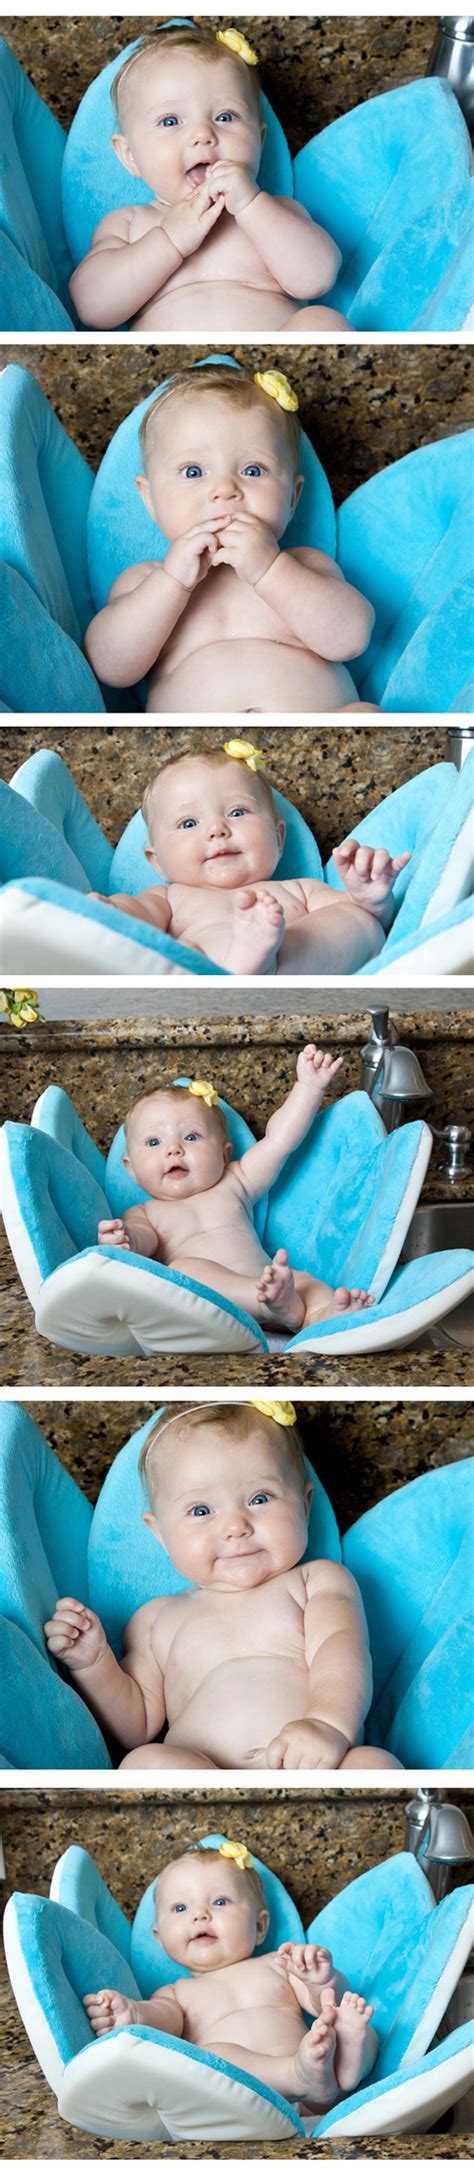 Skip hop moby baby bathtub. Blooming Bath for babies is the best way to bathe your ...